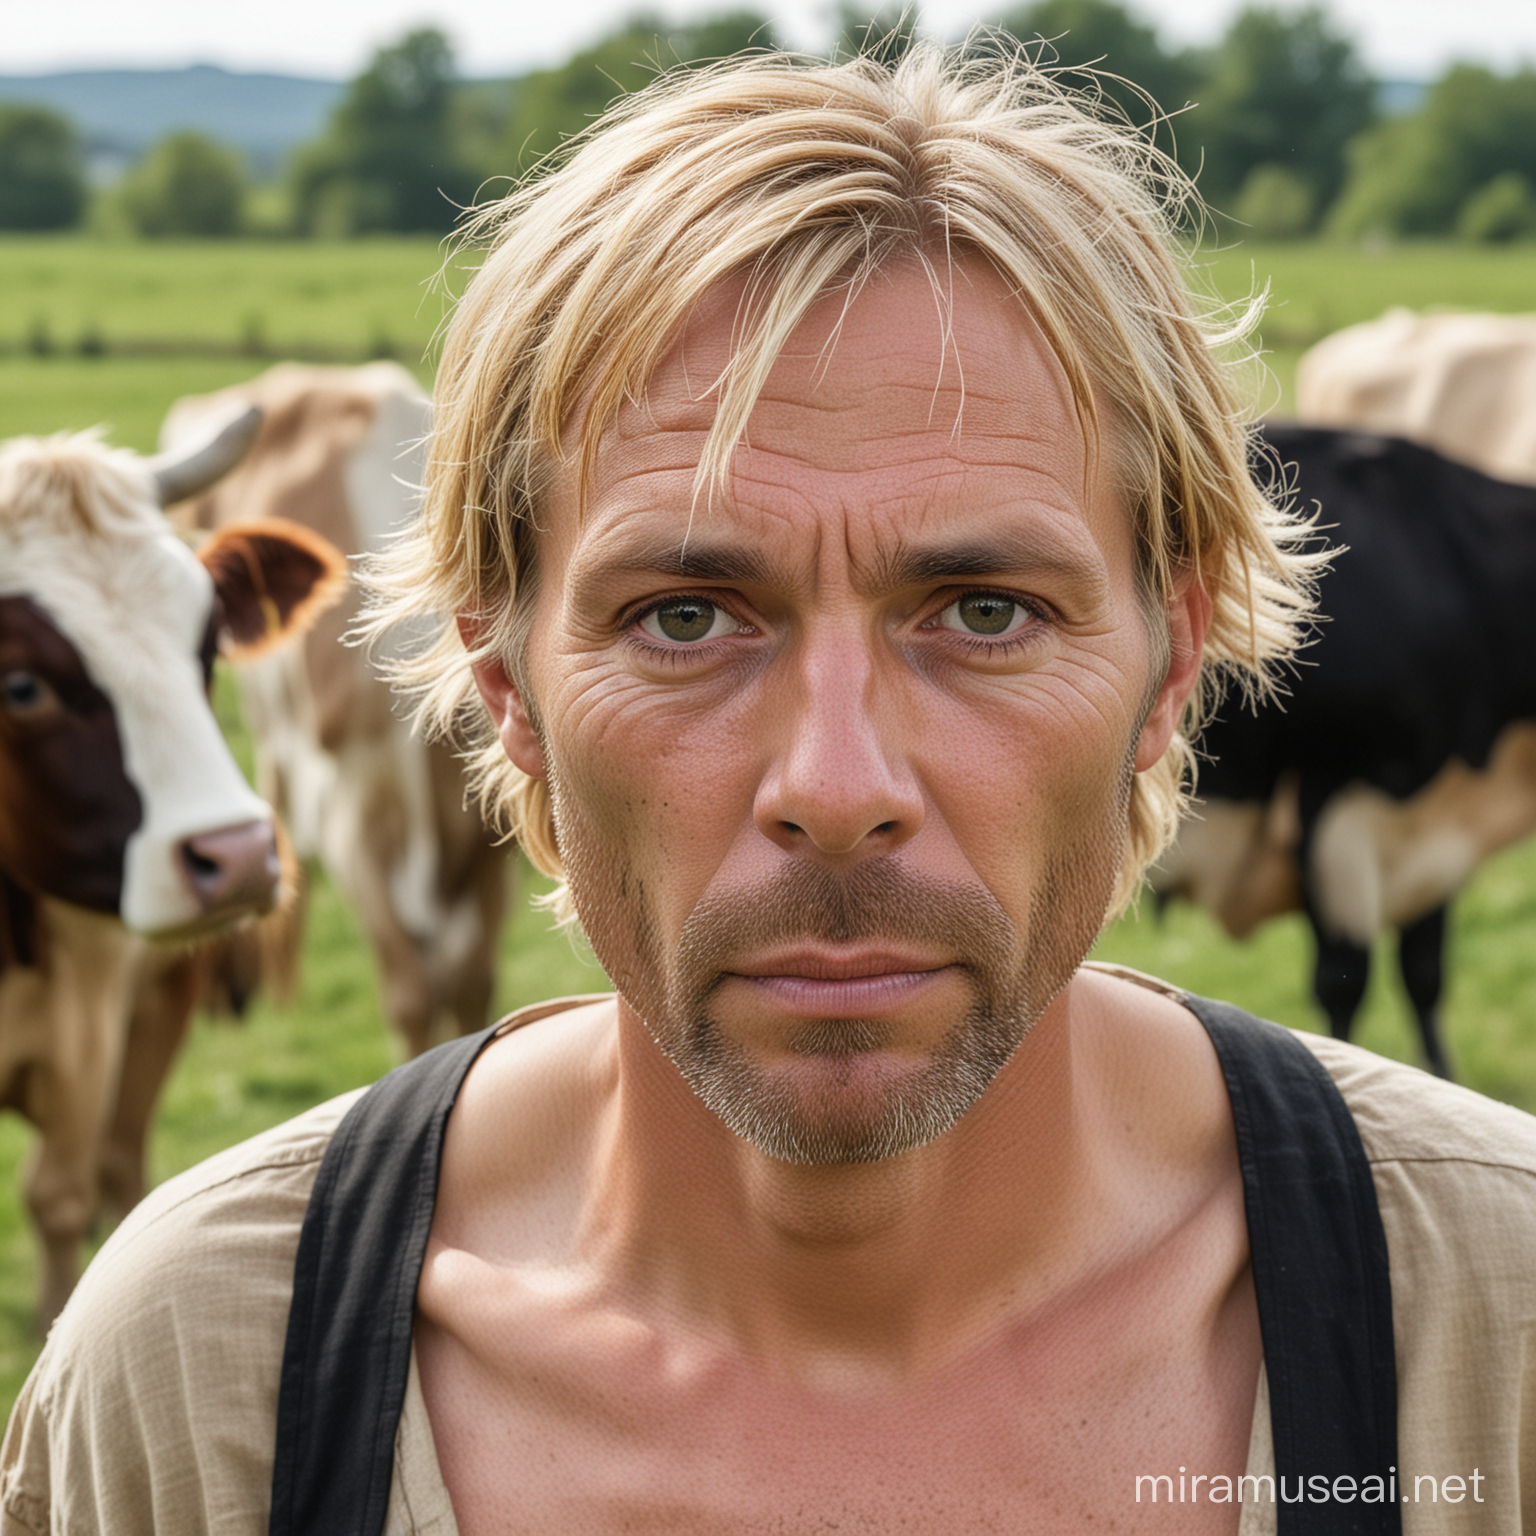 Emaciated Middleaged Farmer with Cows in Pasture